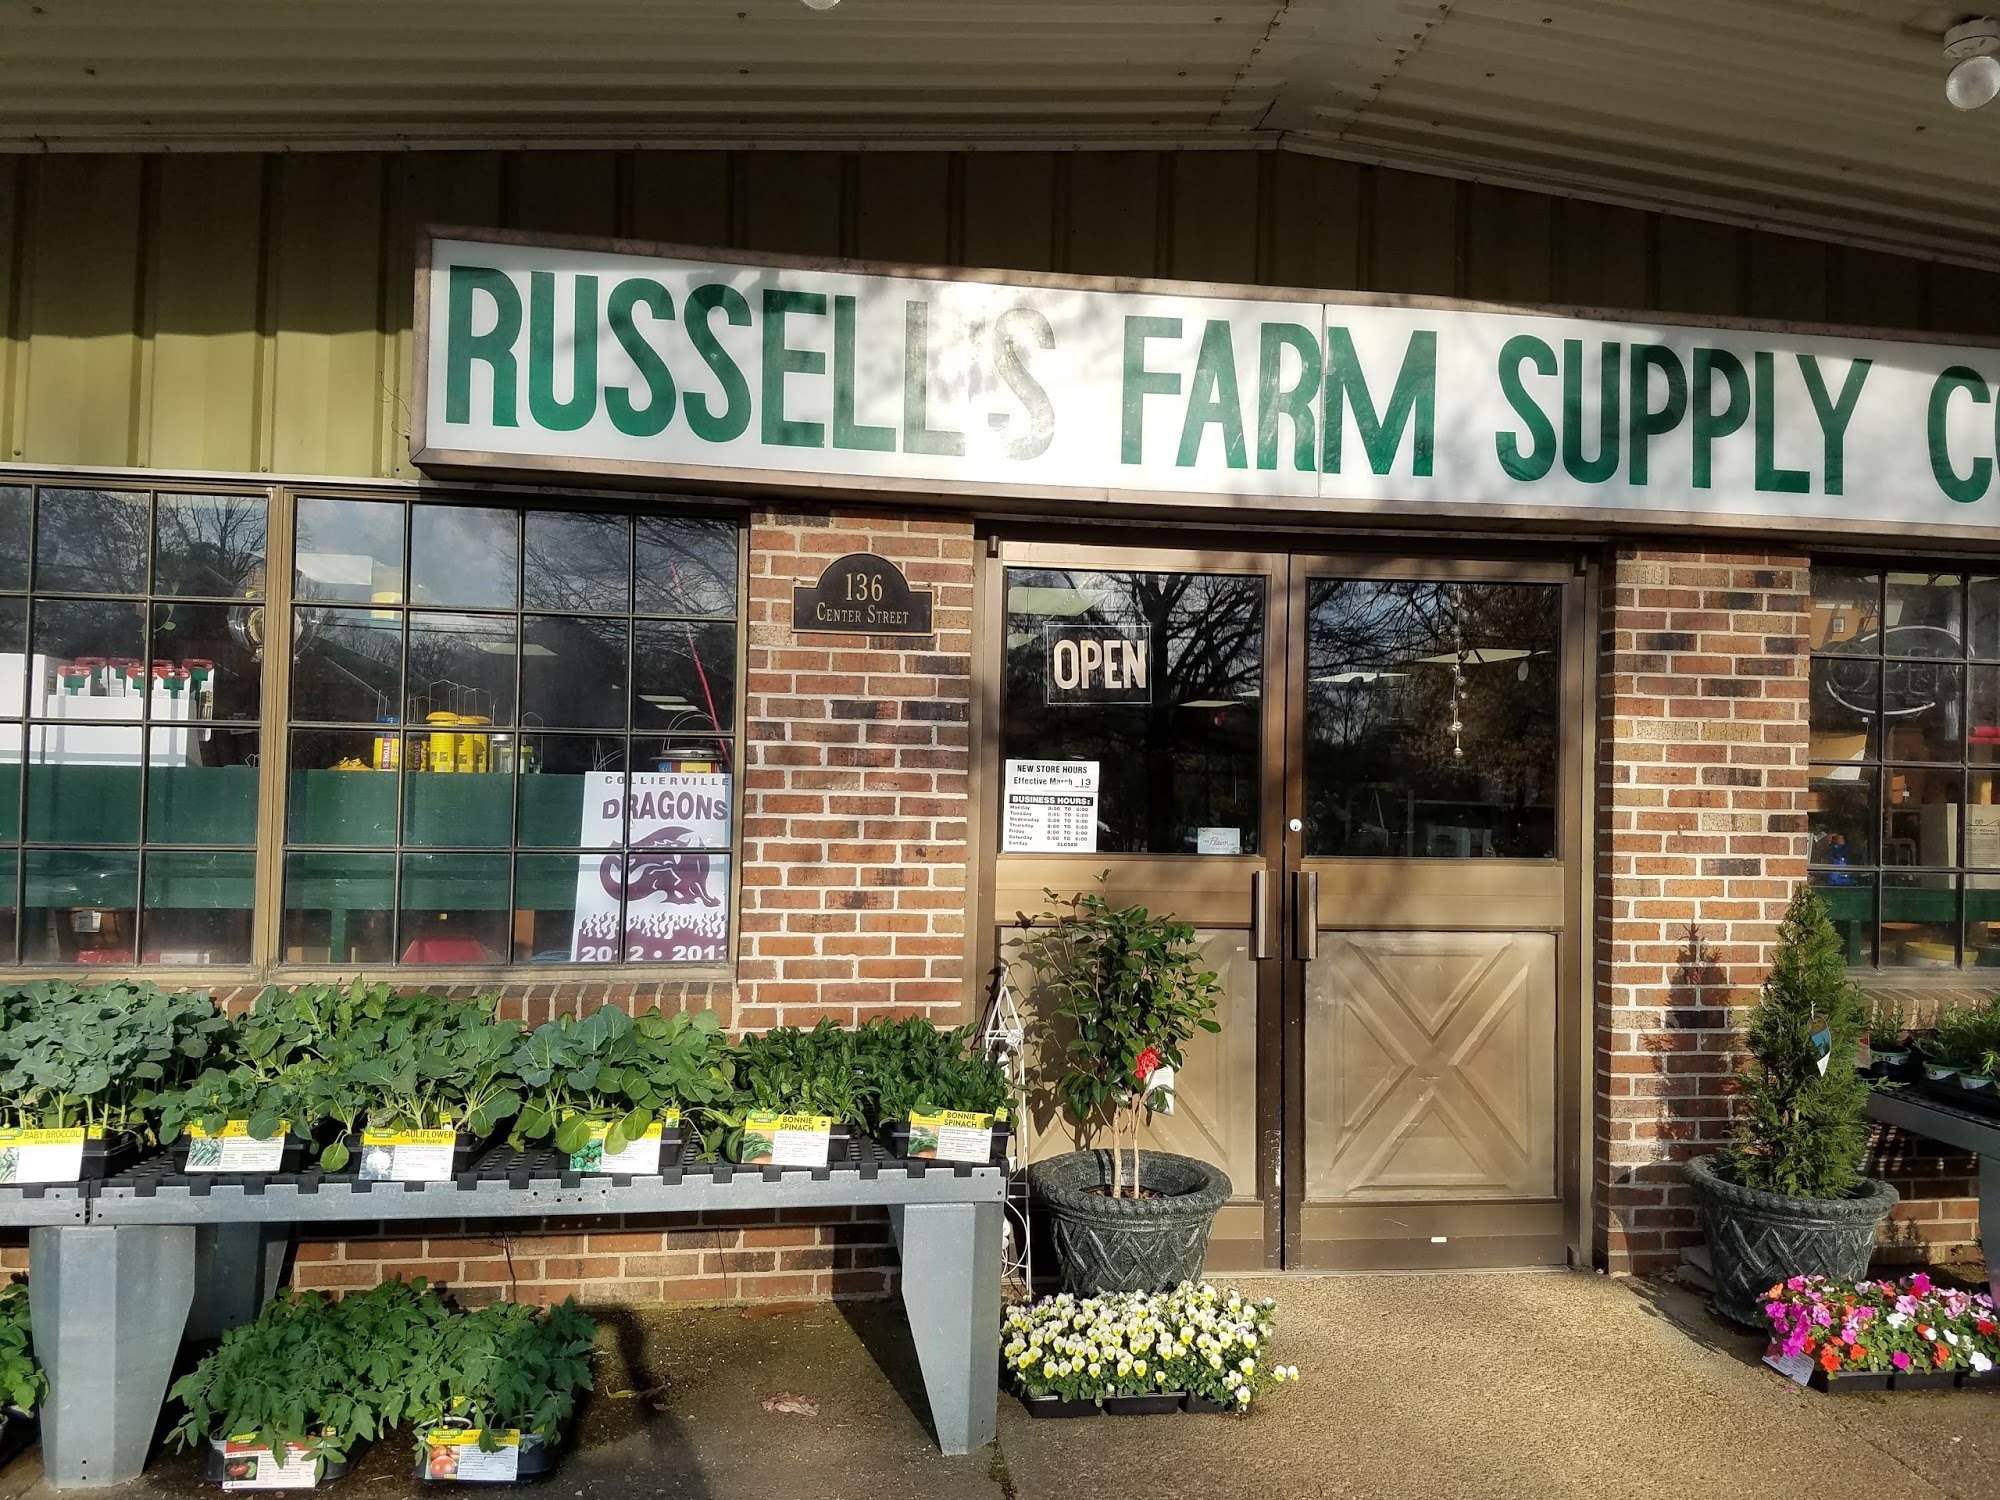 Russell's Farm Supply Co